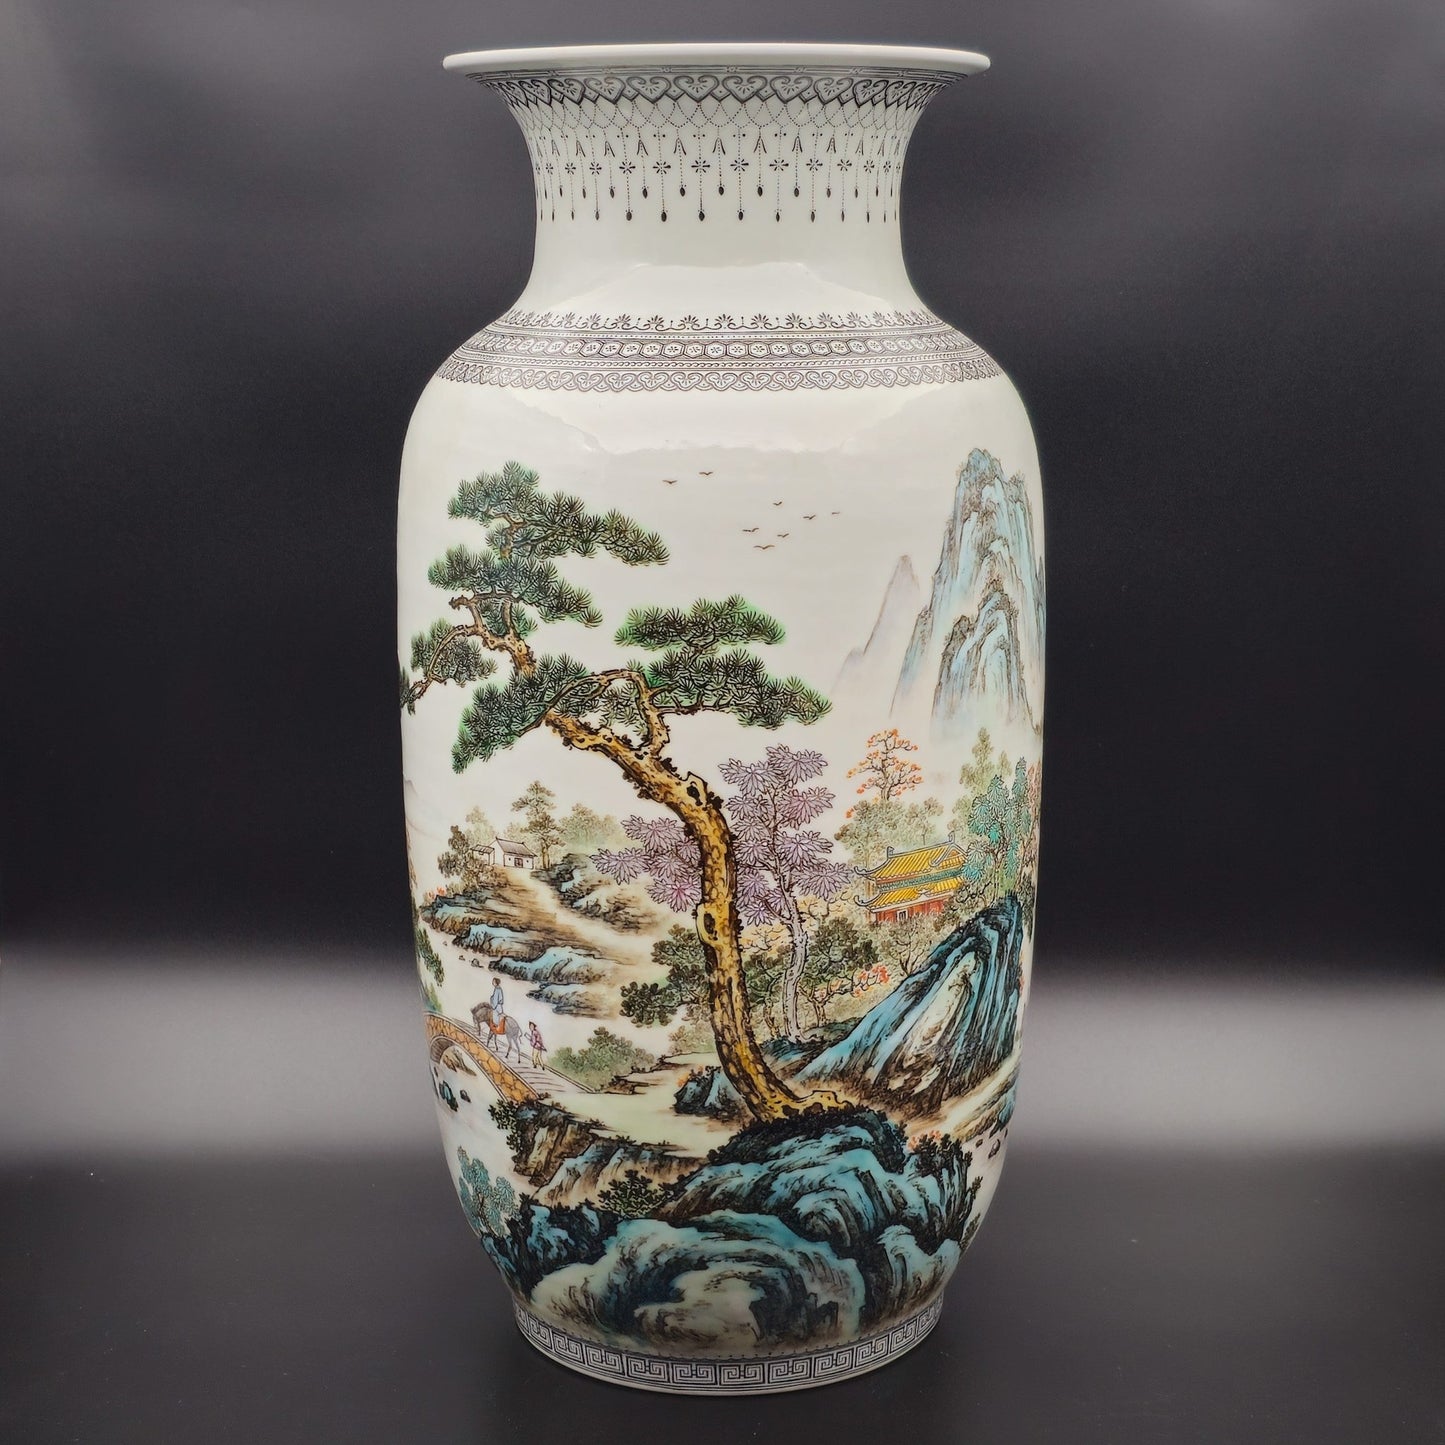 Chinese Famille Rose Large Landscape Vase, Early People's Republic of China Period